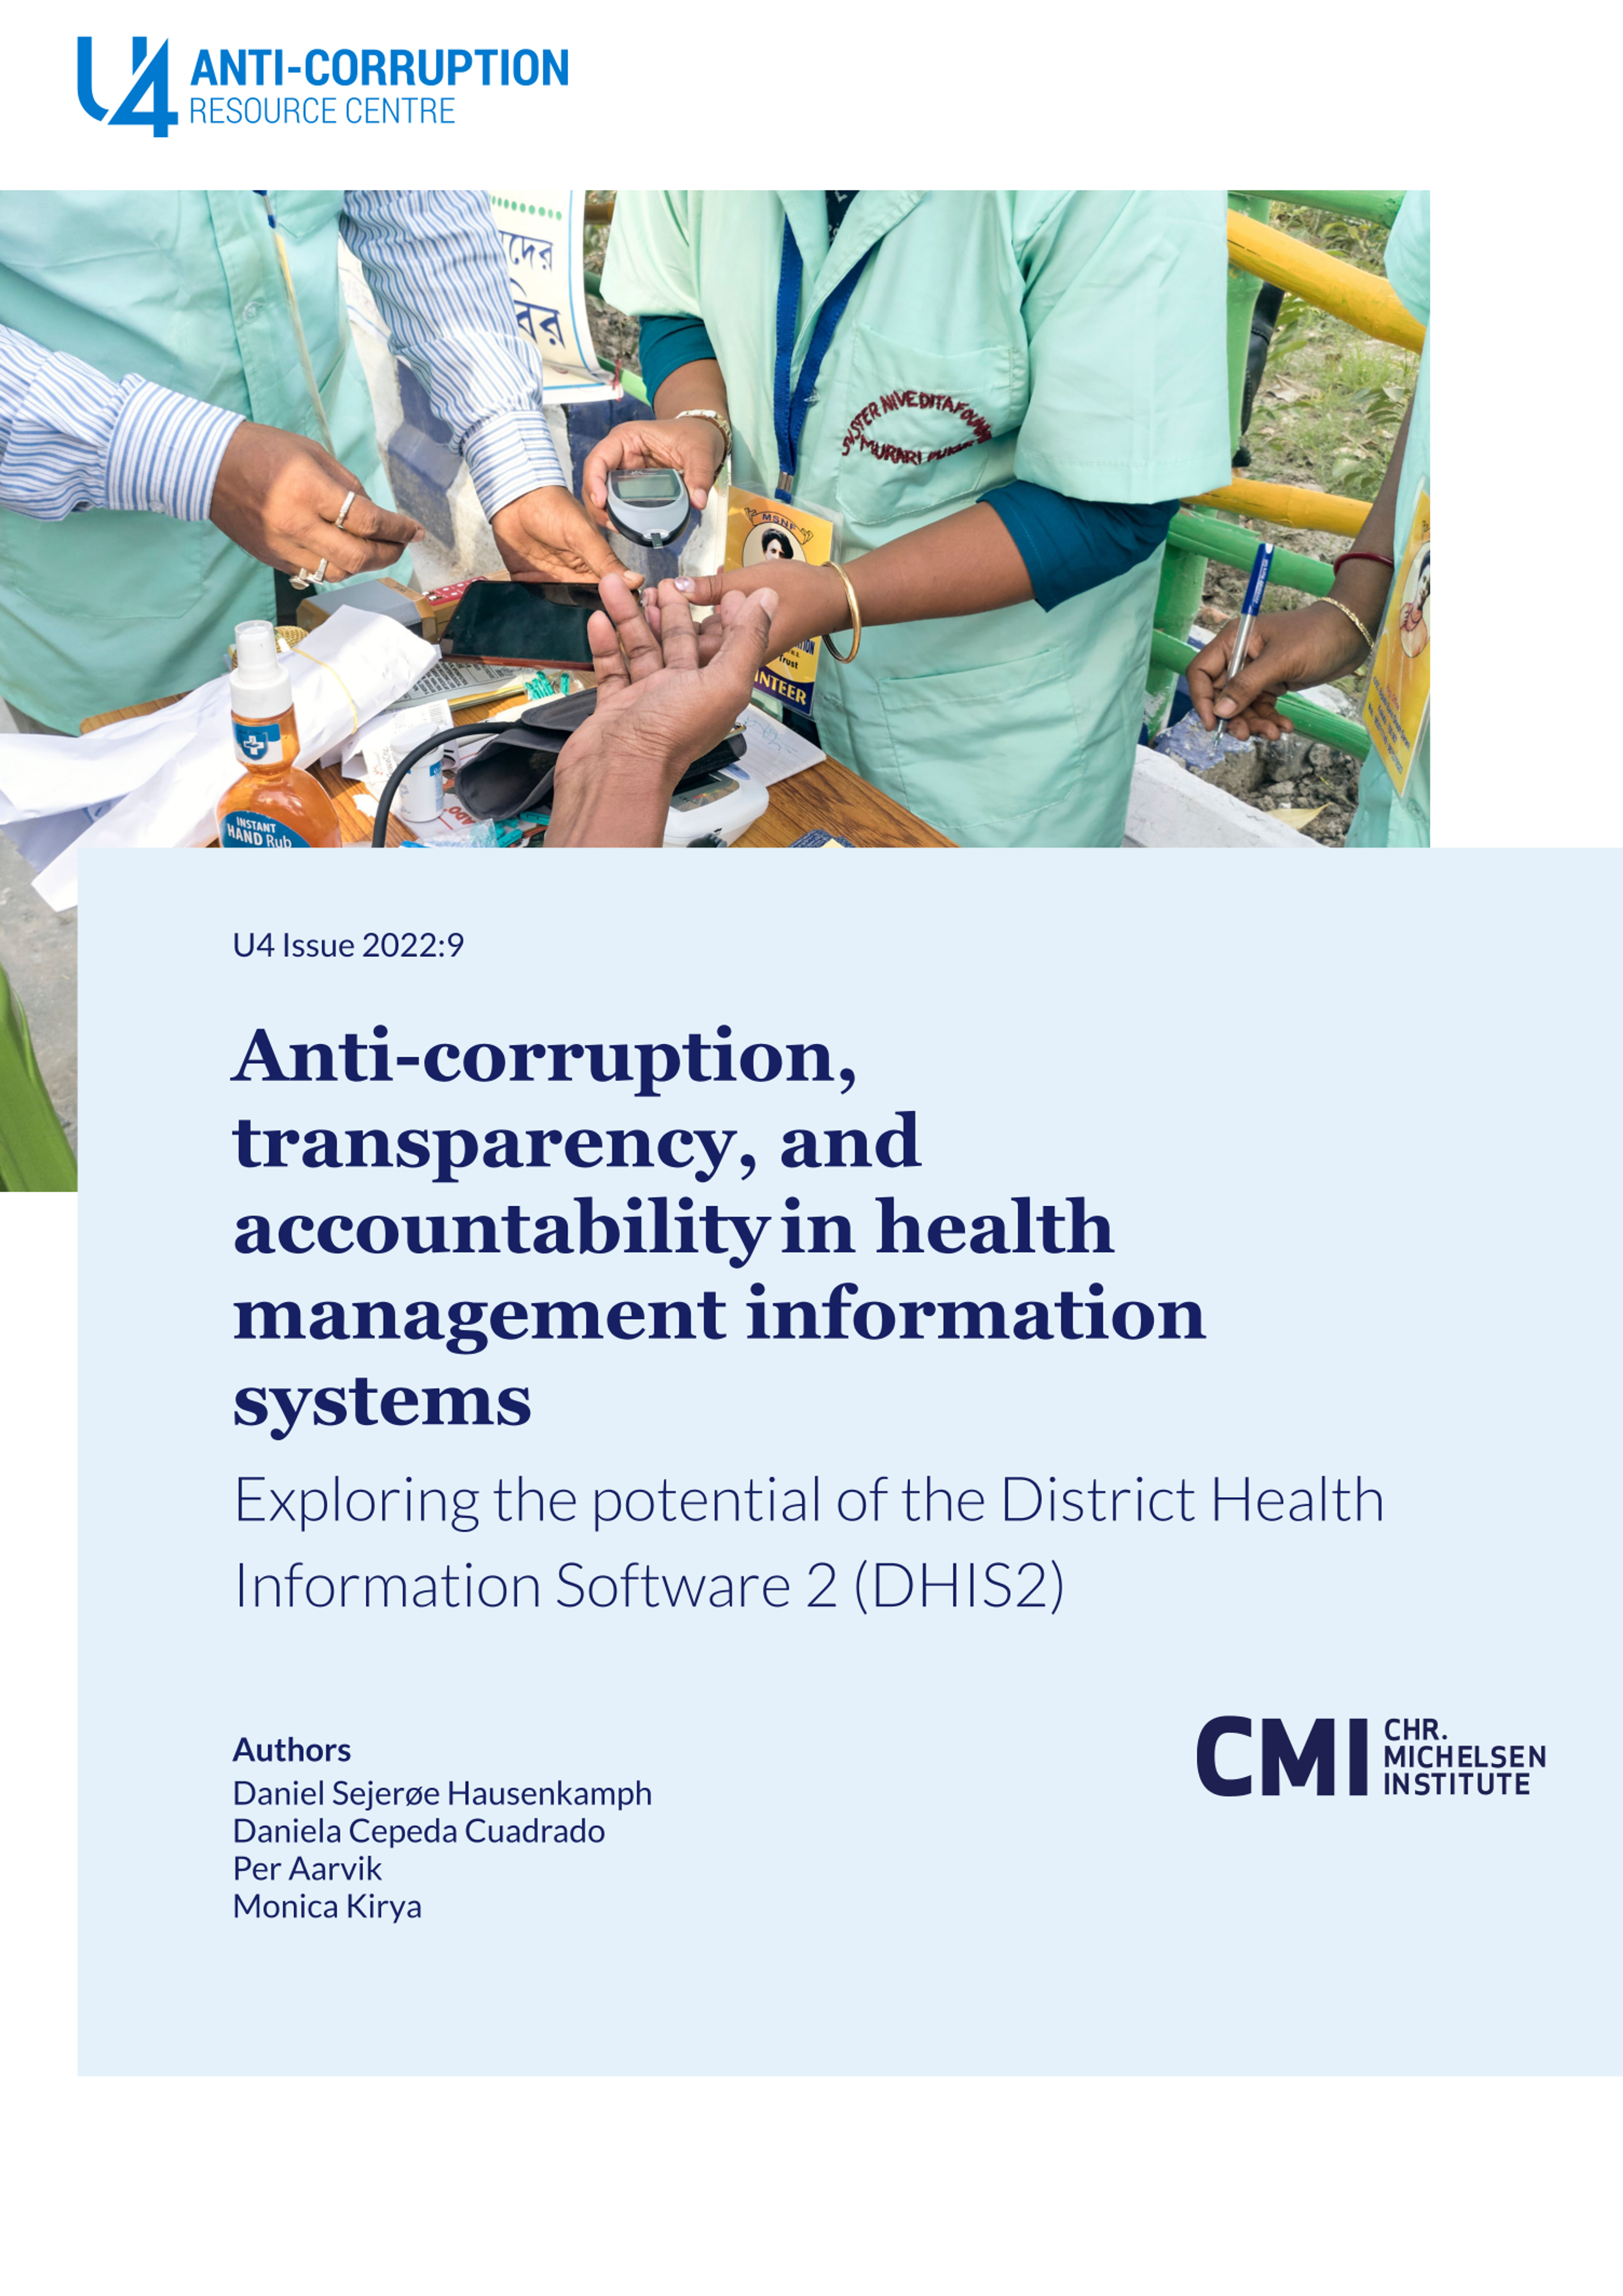 Anti-corruption, transparency, and accountability in health management information systems